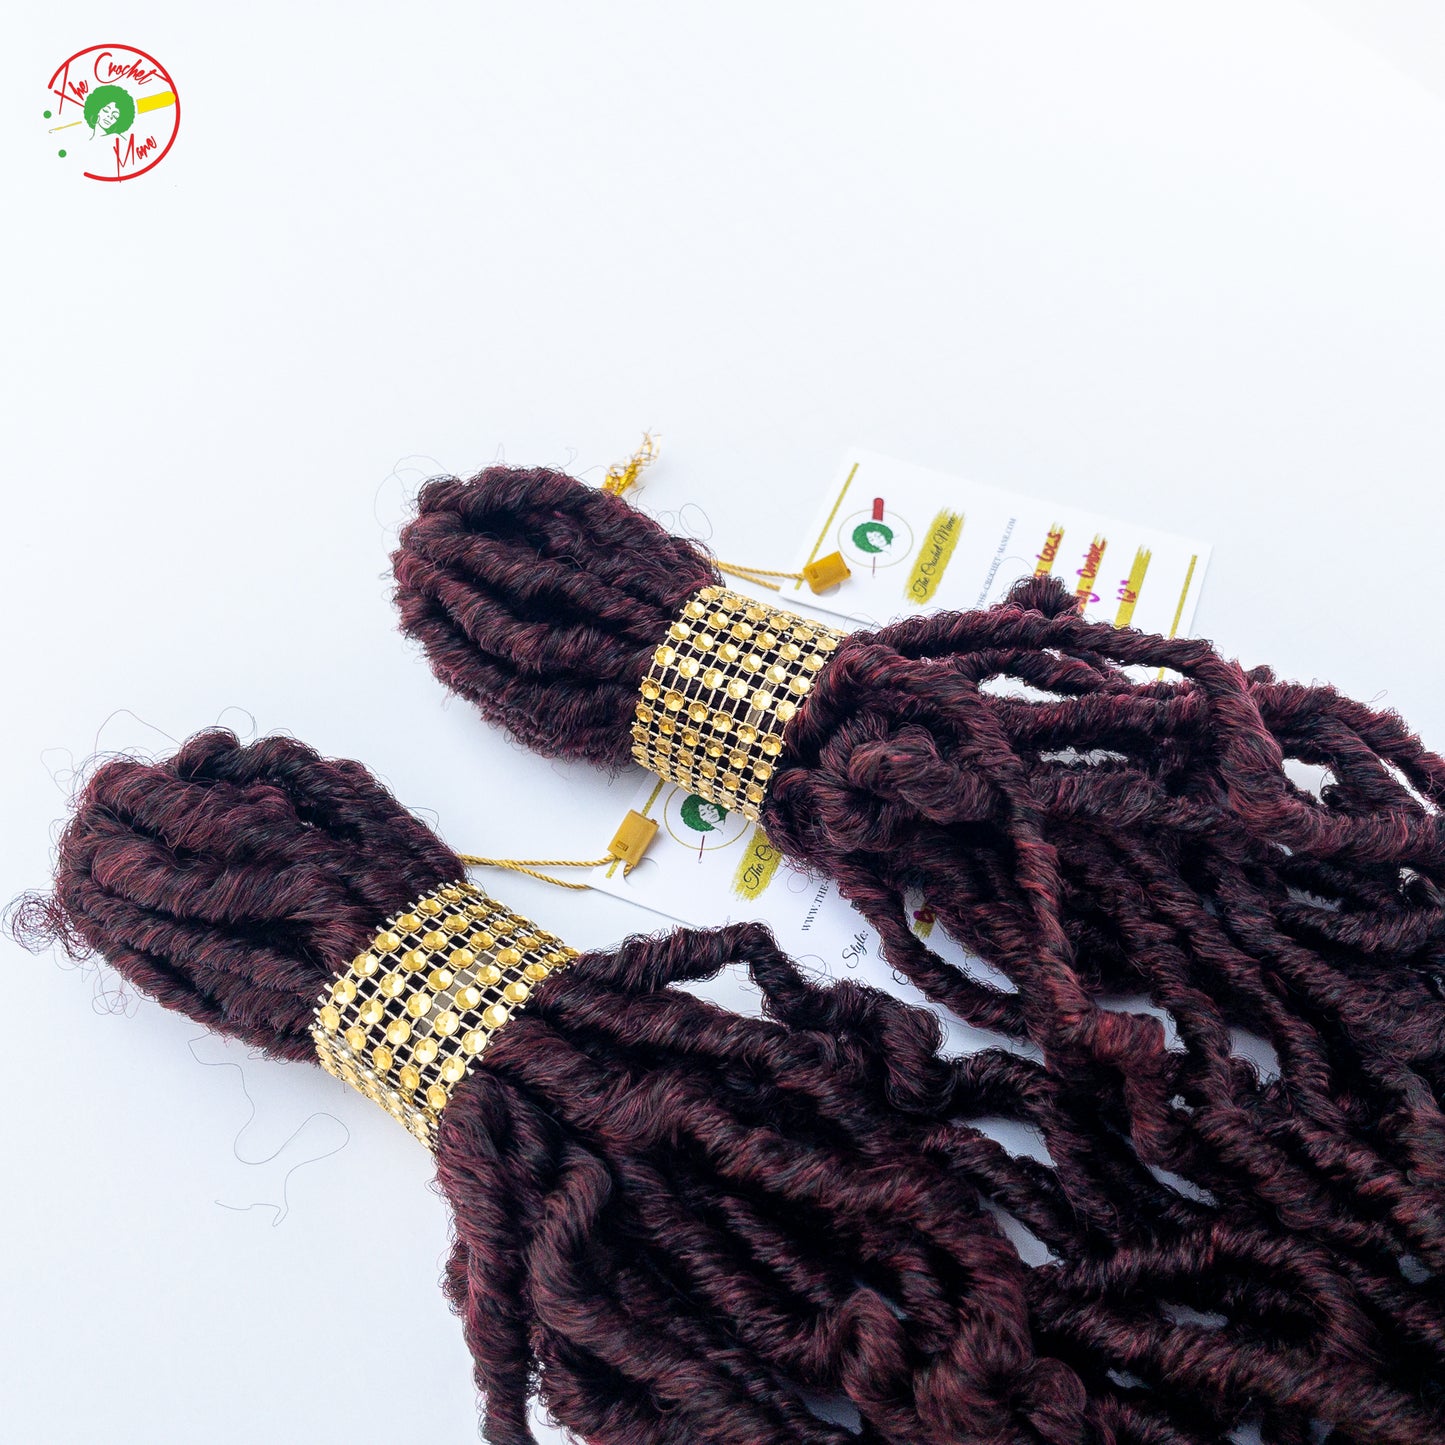 Two Crochet Locs Bundle Laying Flat Beside Each Other Against A White Background